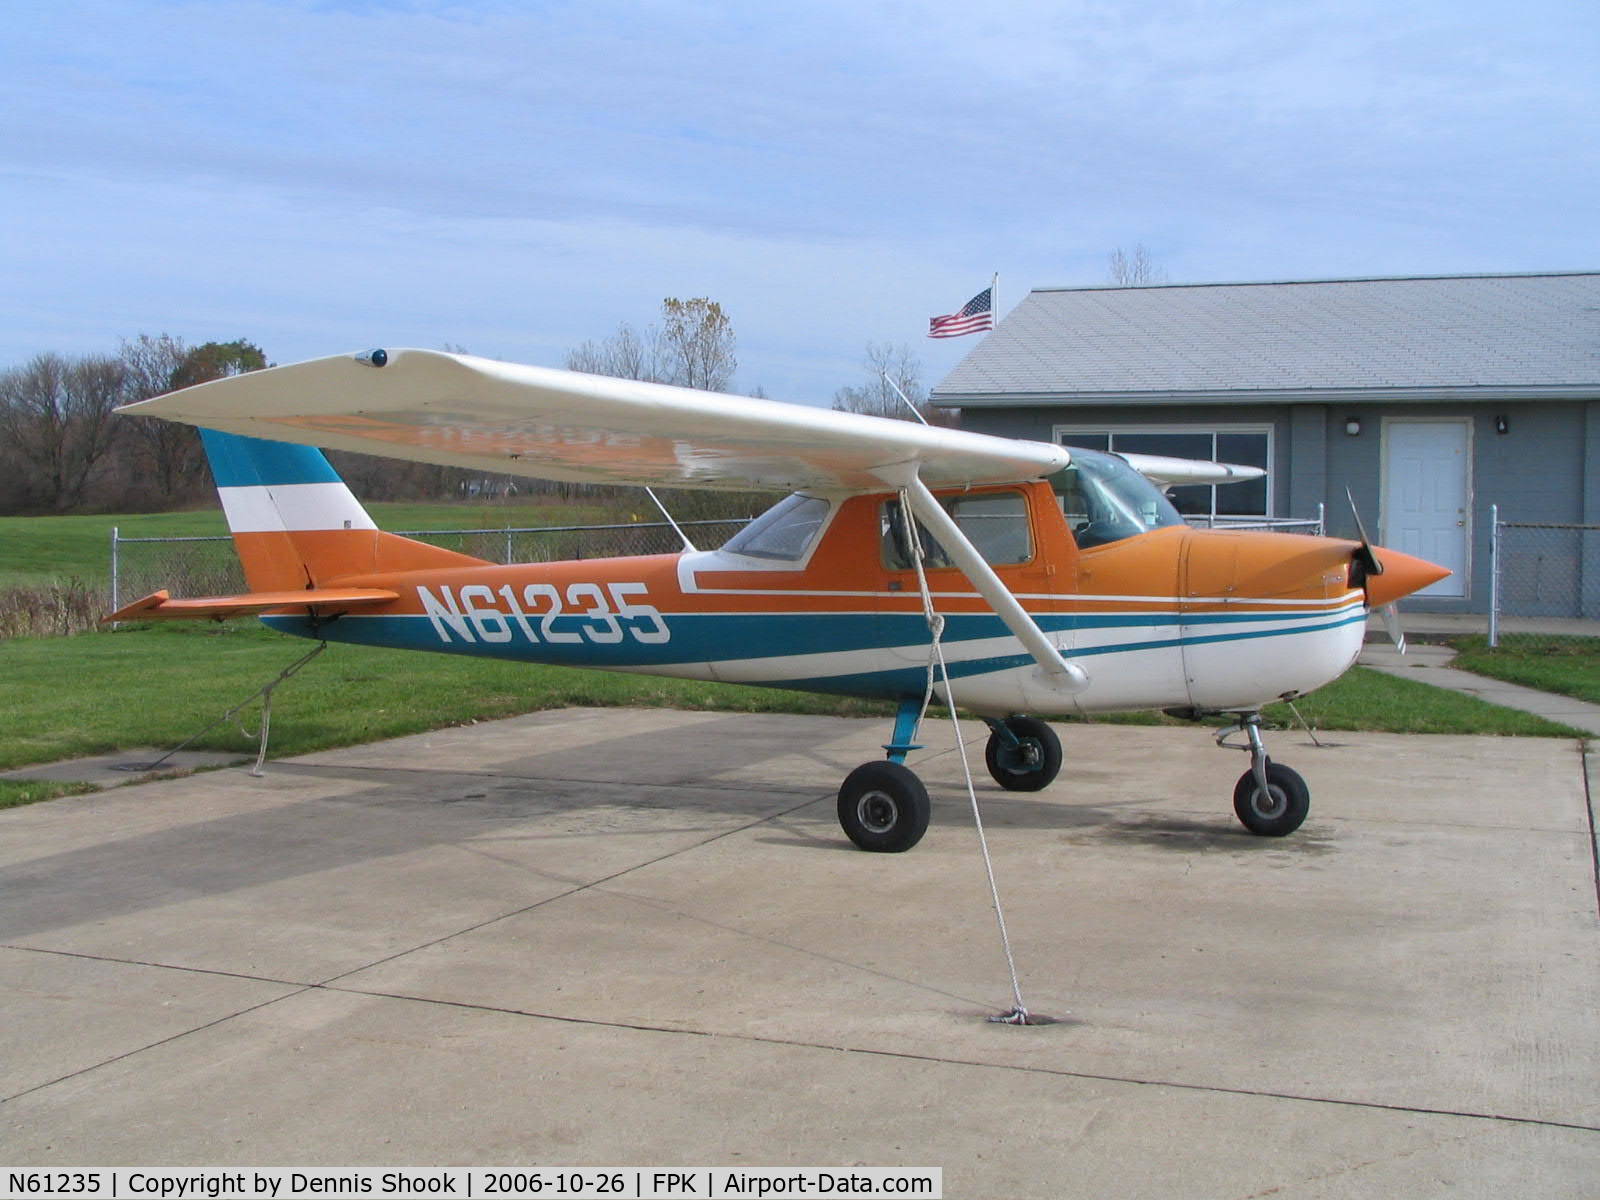 N61235, 1969 Cessna 150J C/N 15070908, beatiful inside and out